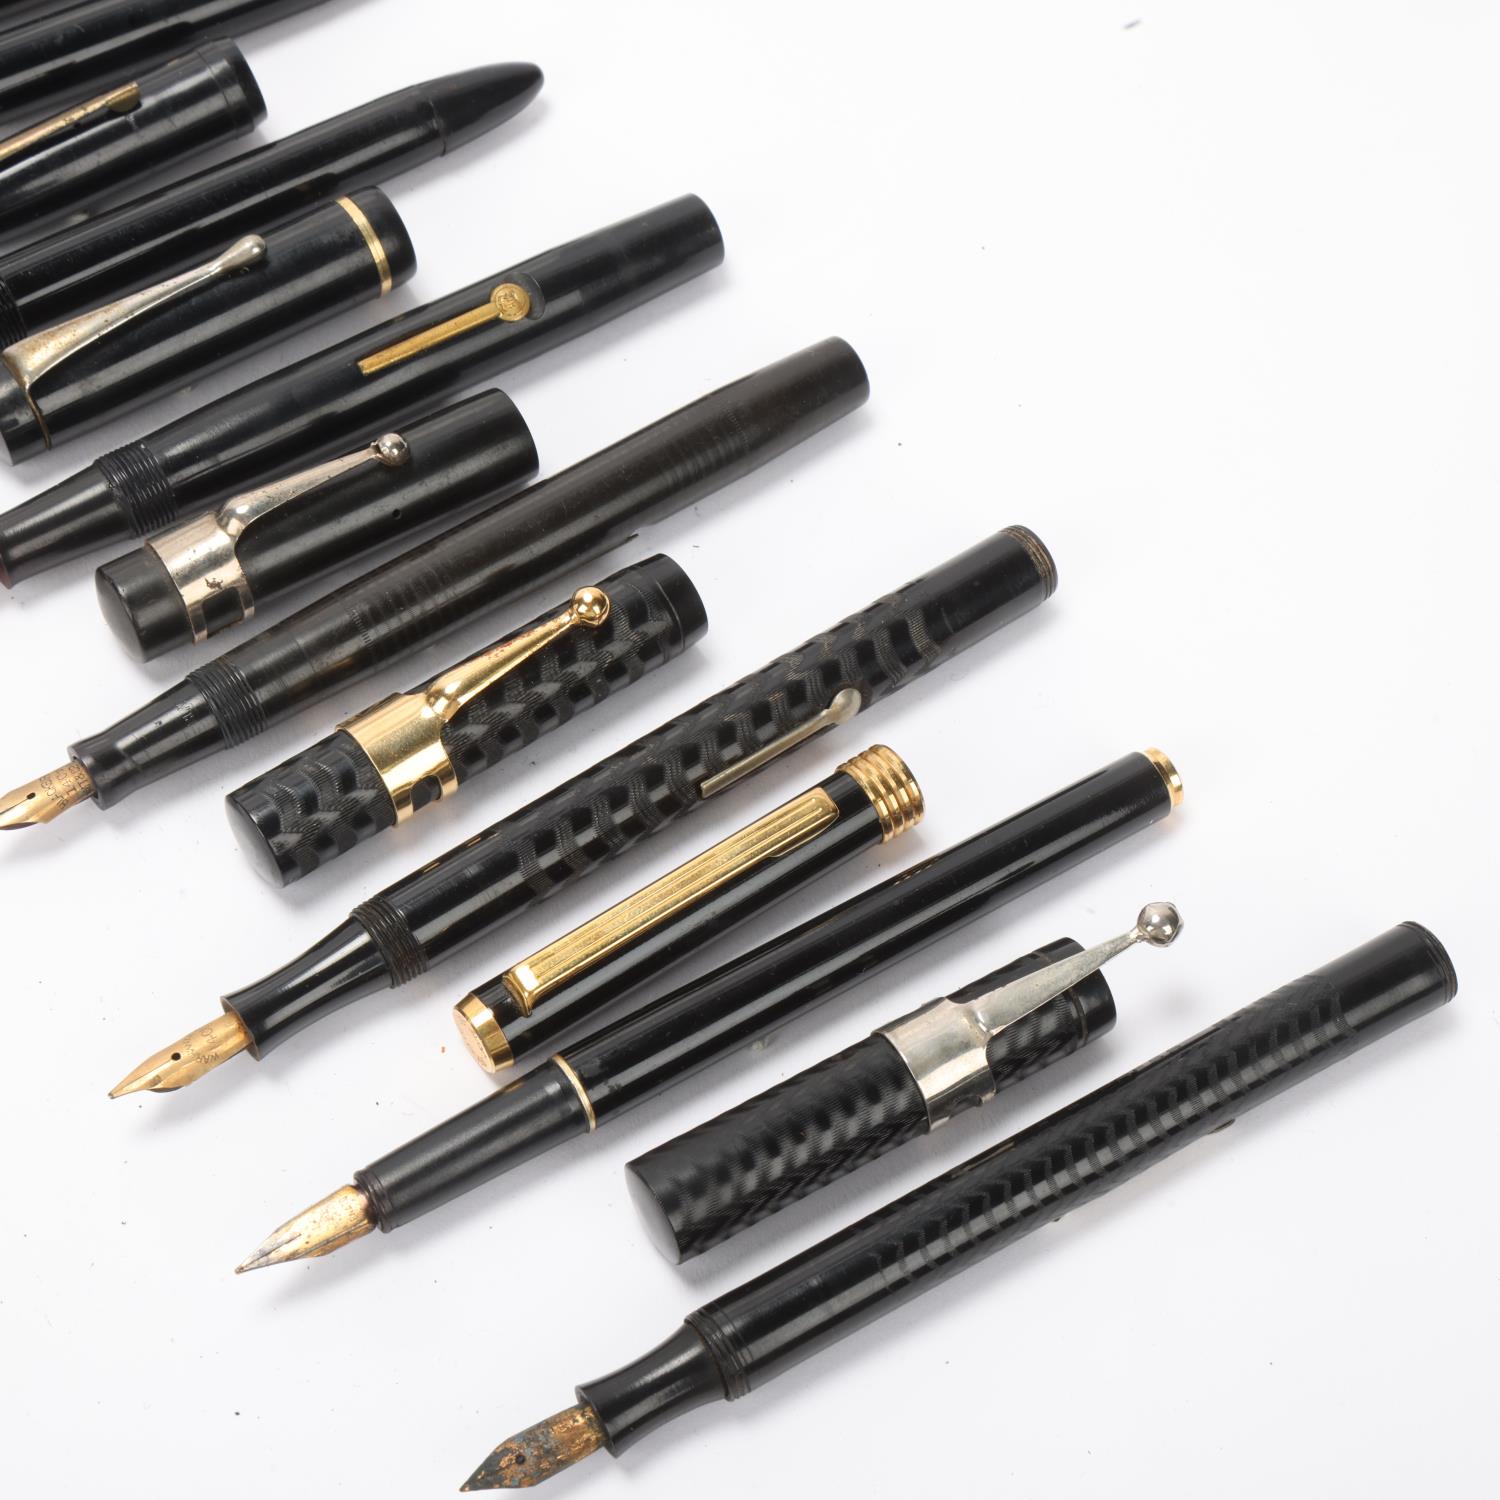 12 vintage fountain pens, including pens by Blackbird, Senator, Burnham, many with 14ct gold nibs - Image 2 of 4